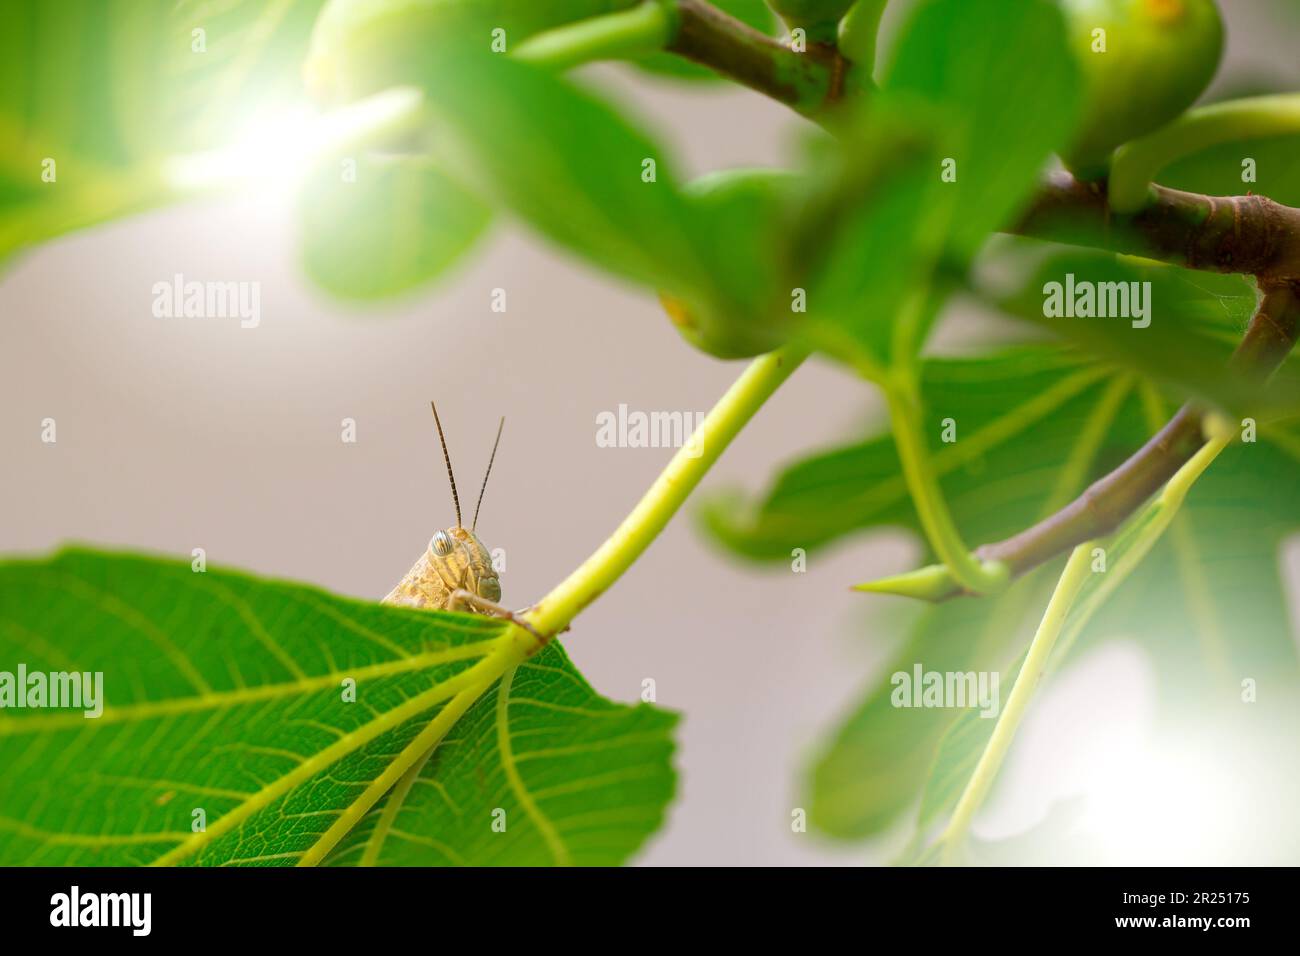 Grasshopper jump close up, insect macro,nature background Stock Photo